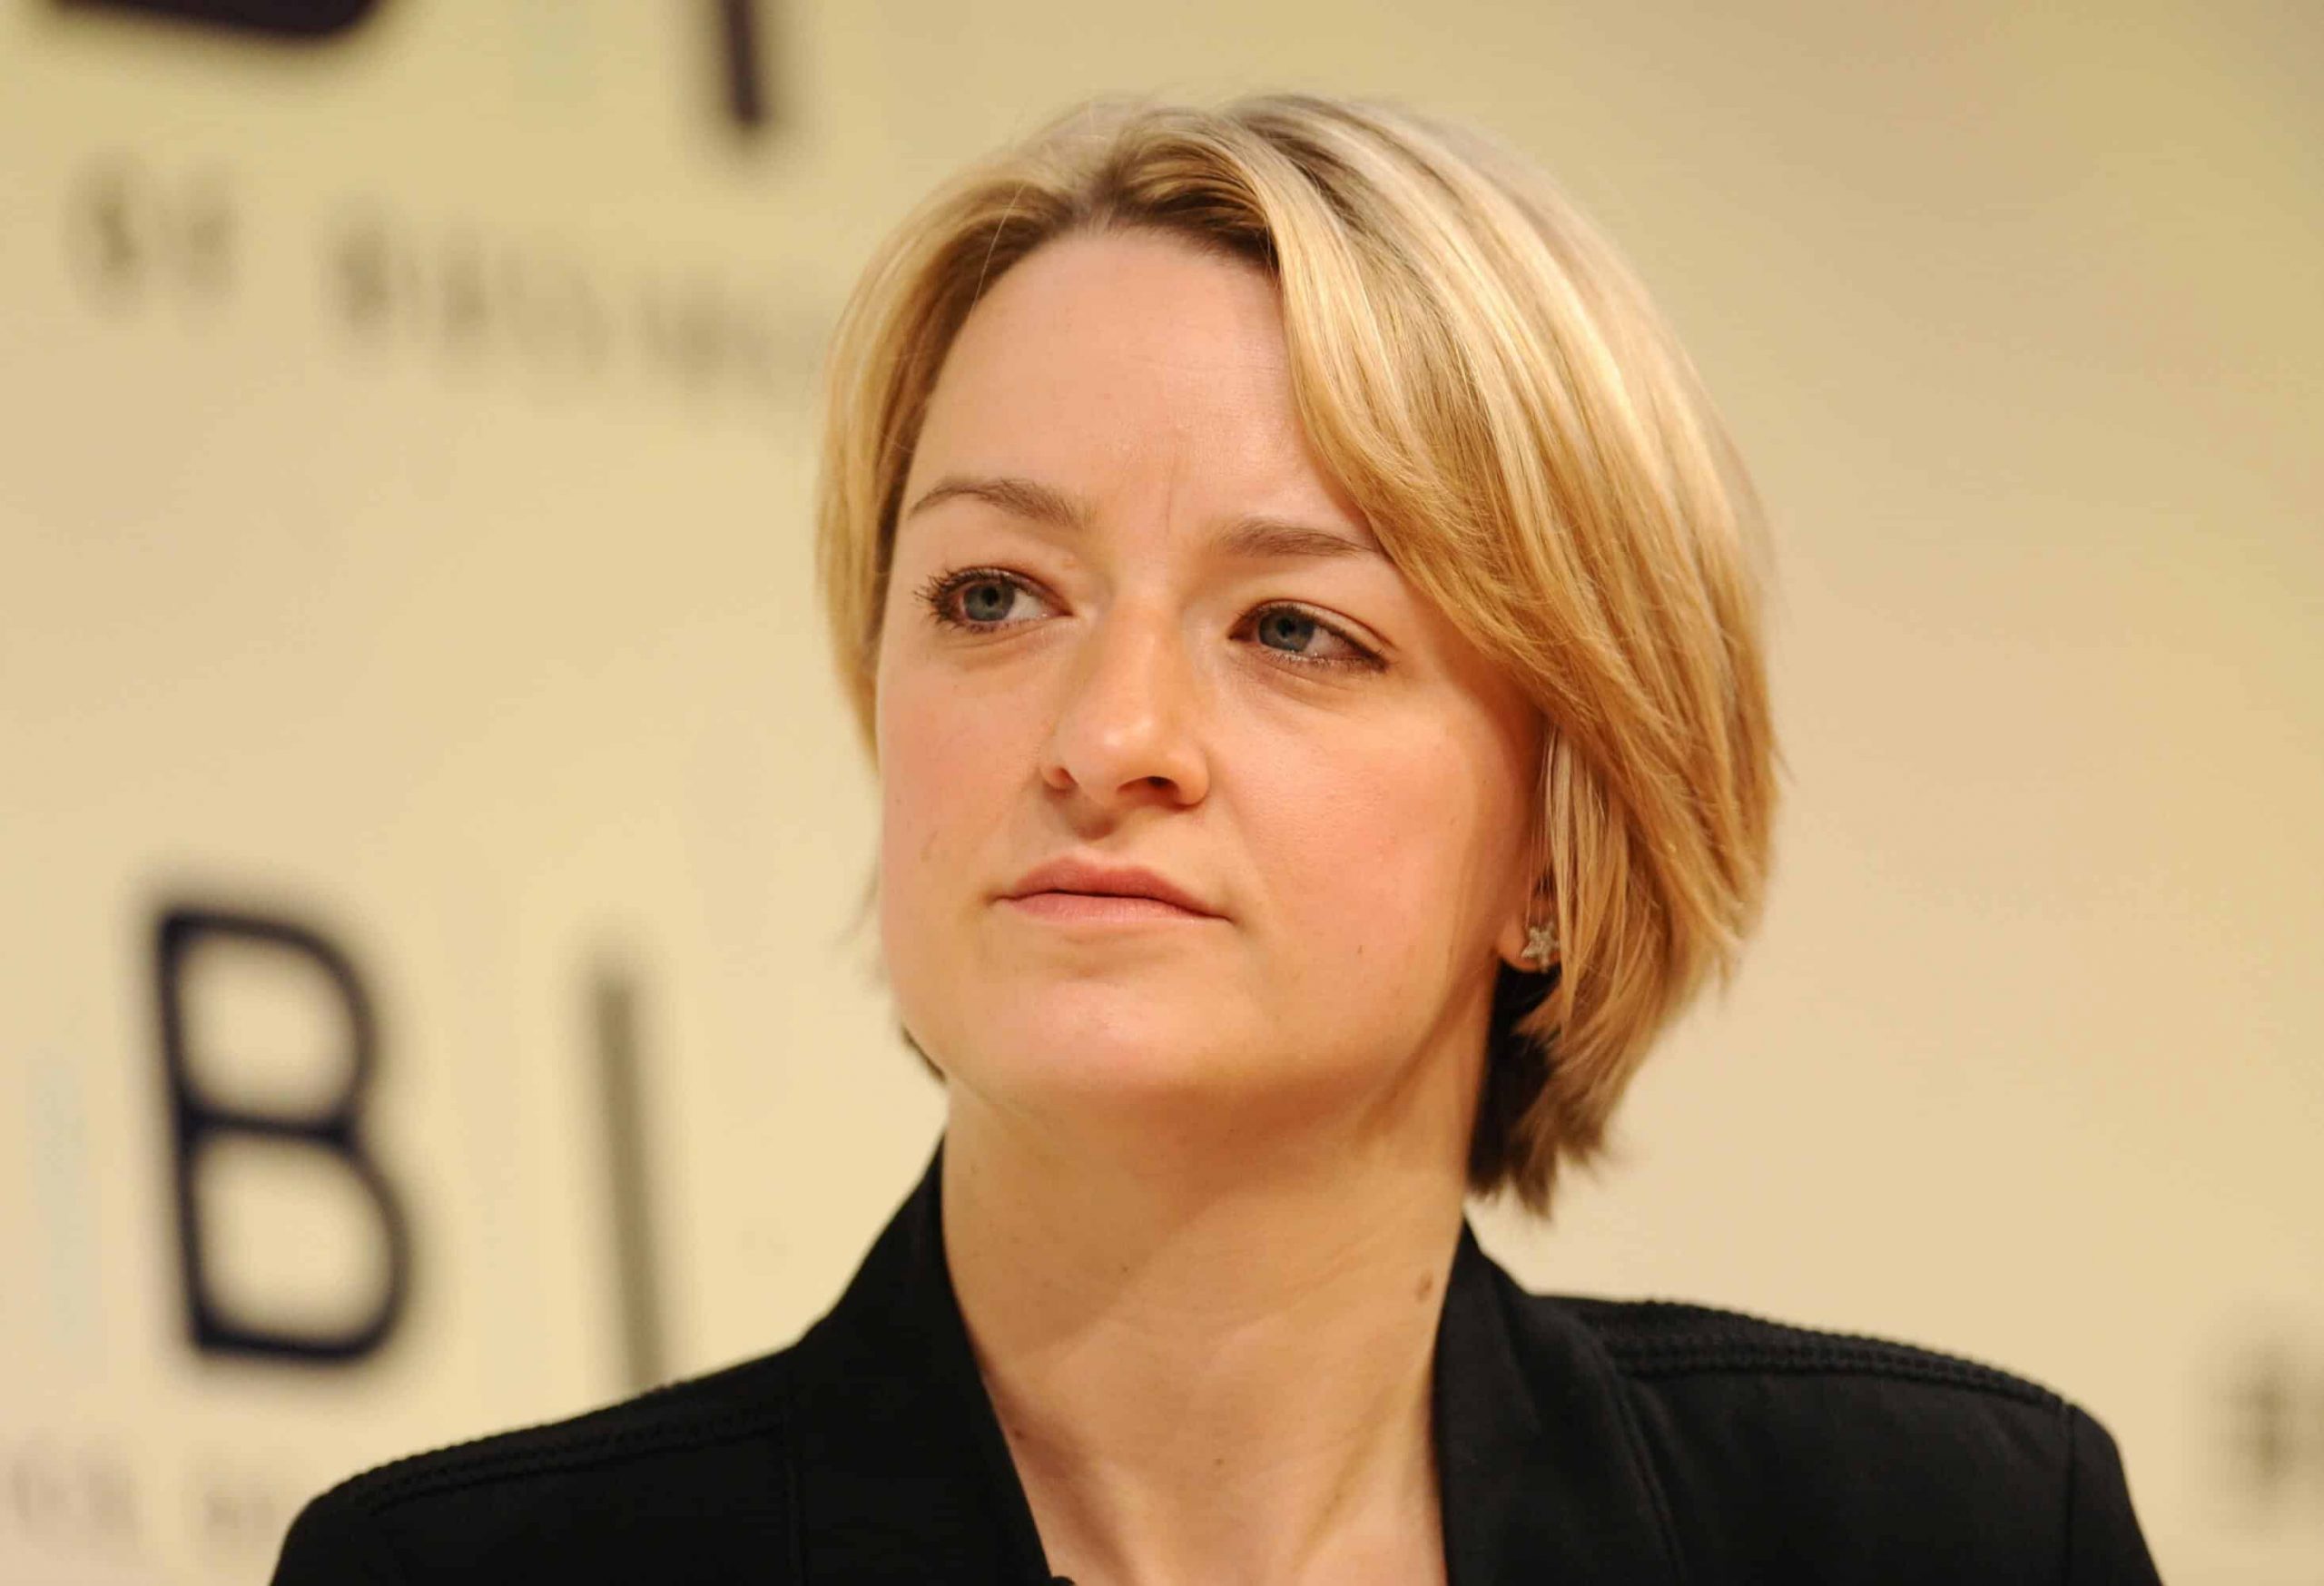 BBC confirms: Kuenssberg to step down as political editor